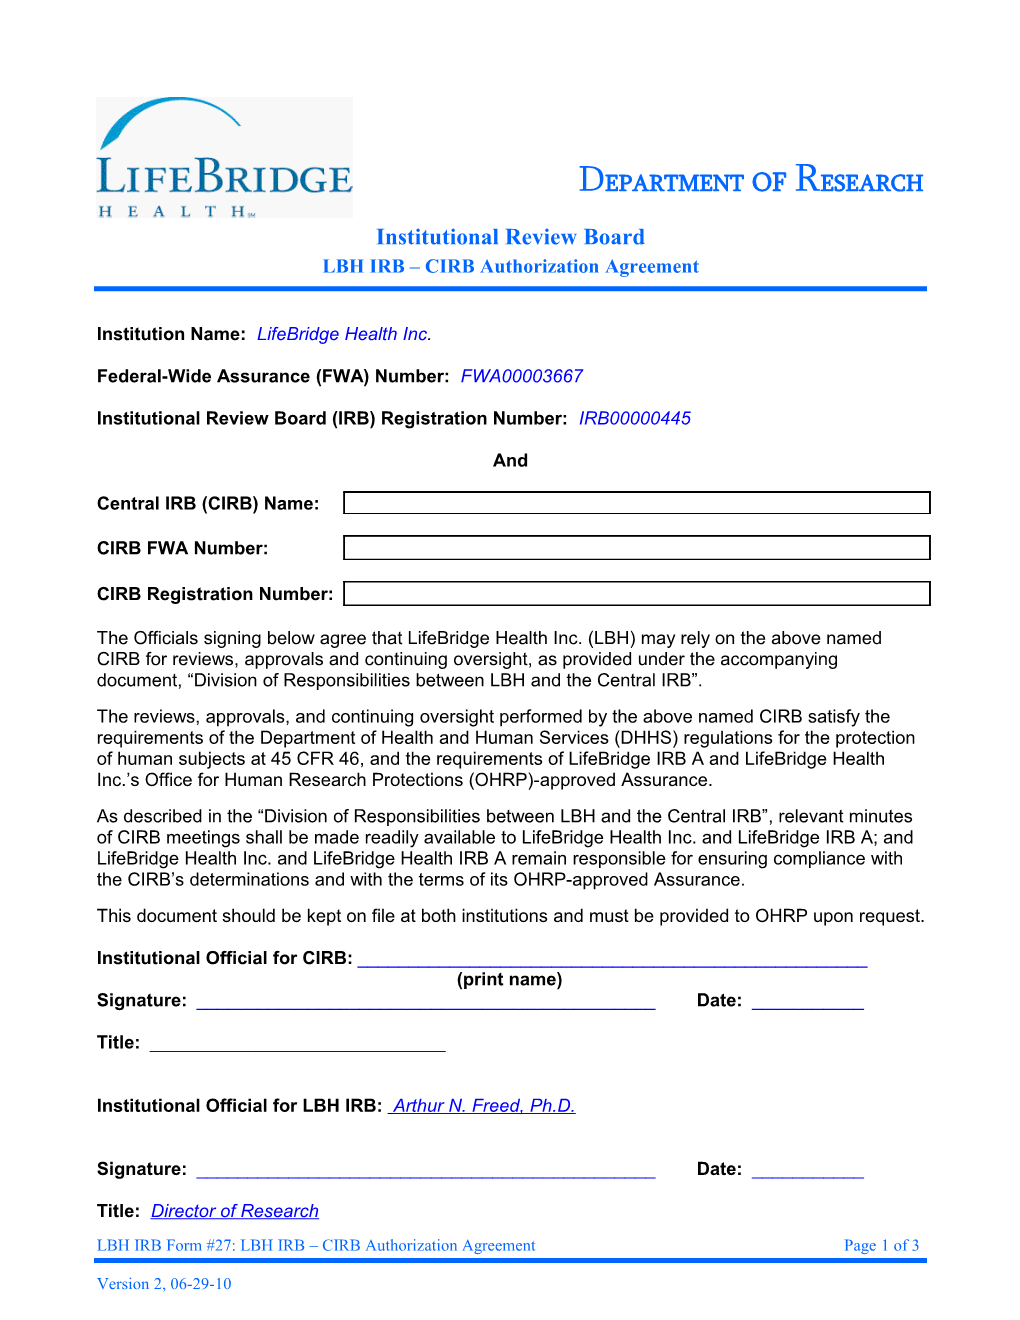 LBH IRB Form #27: LBH IRB CIRB Authorization Agreement Page 1 of 3